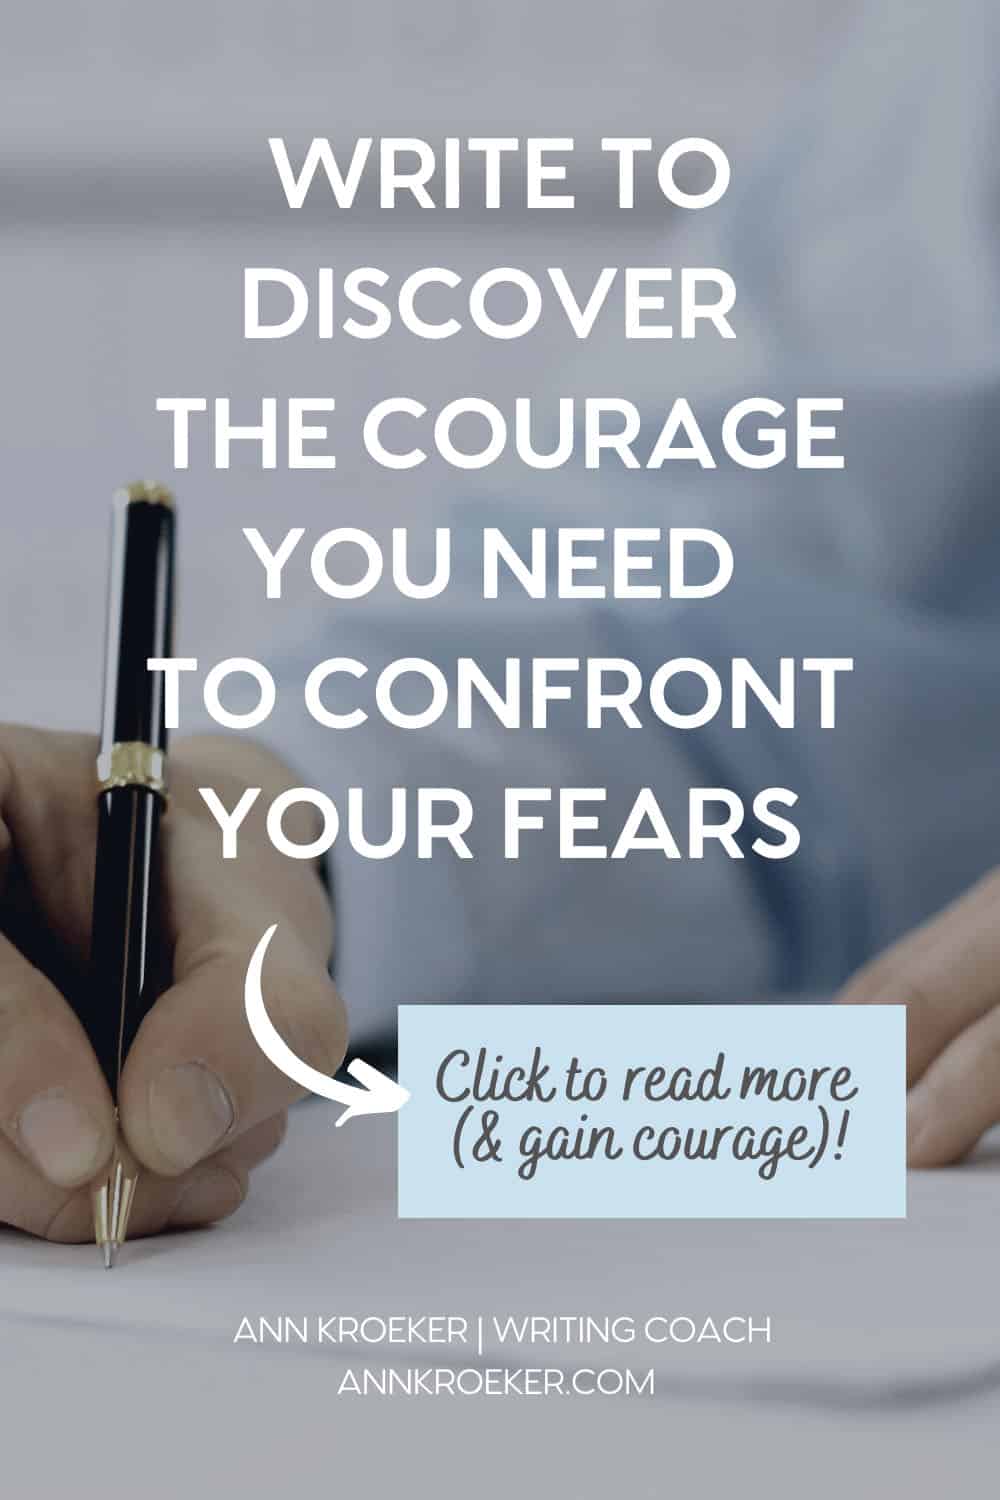 Photo of hand writing with pen on paper overlaid with the words "Write to Discover the Courage You Need to Confront Your Fears" and "Click to Read (& gain courage) - Ann Kroeker, Writing Coach"